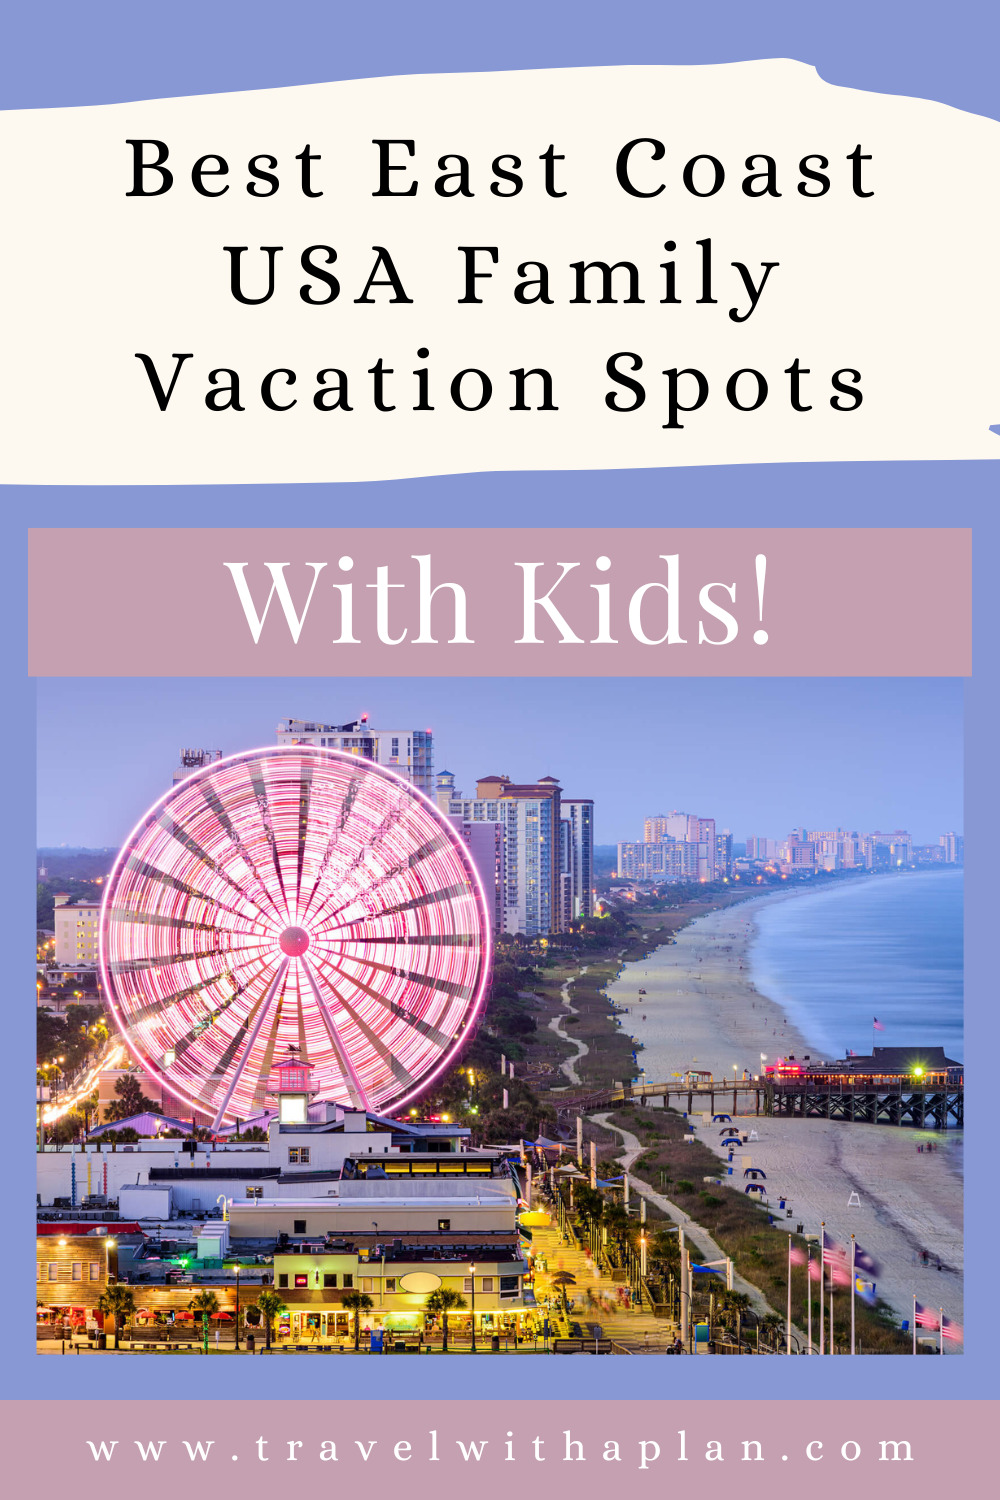 Check out our list of the best East Coast family vacation spots from top U.S. family travel blog, Travel With A Plan!